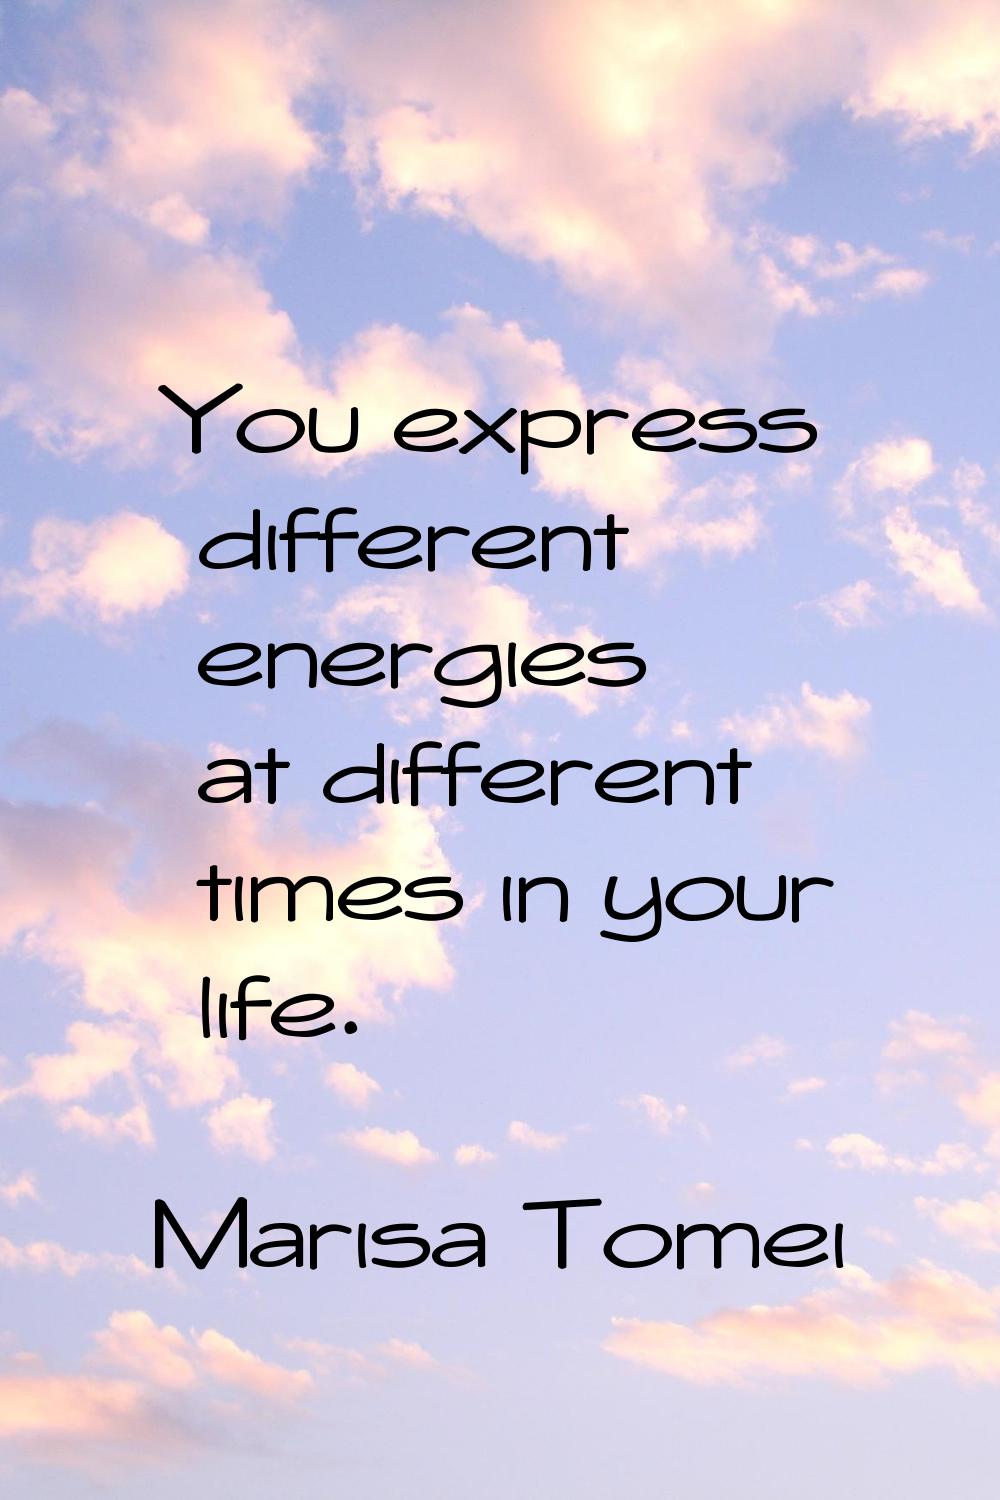 You express different energies at different times in your life.